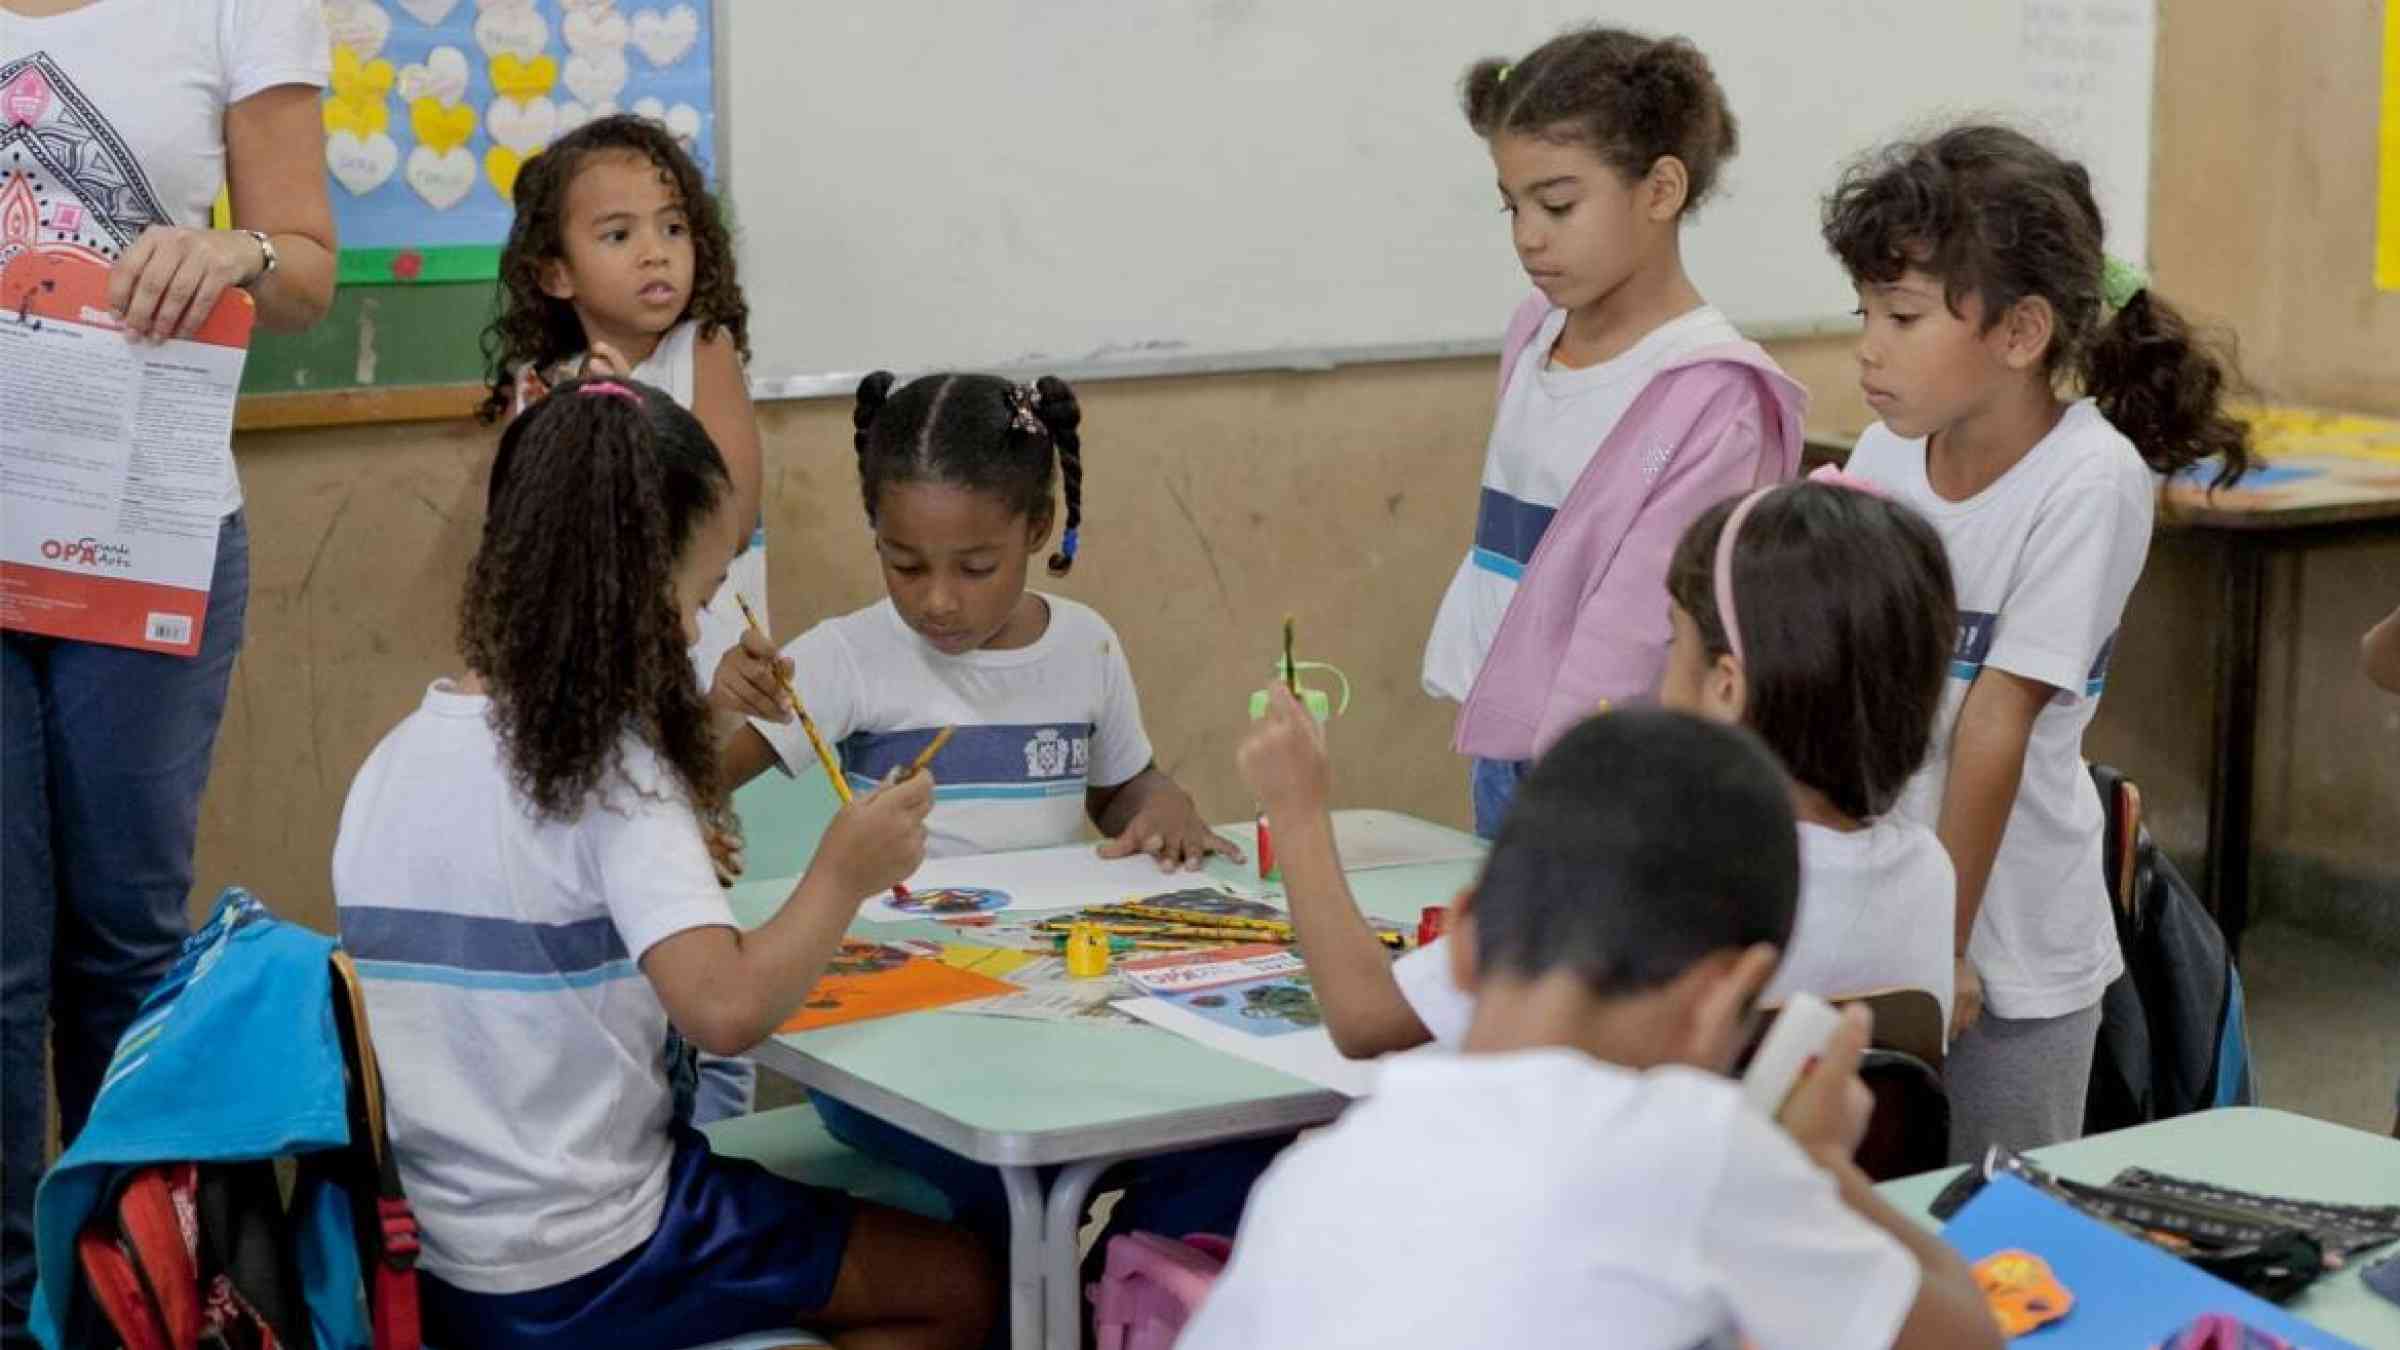 Young students in a classroom at their desks doing group work